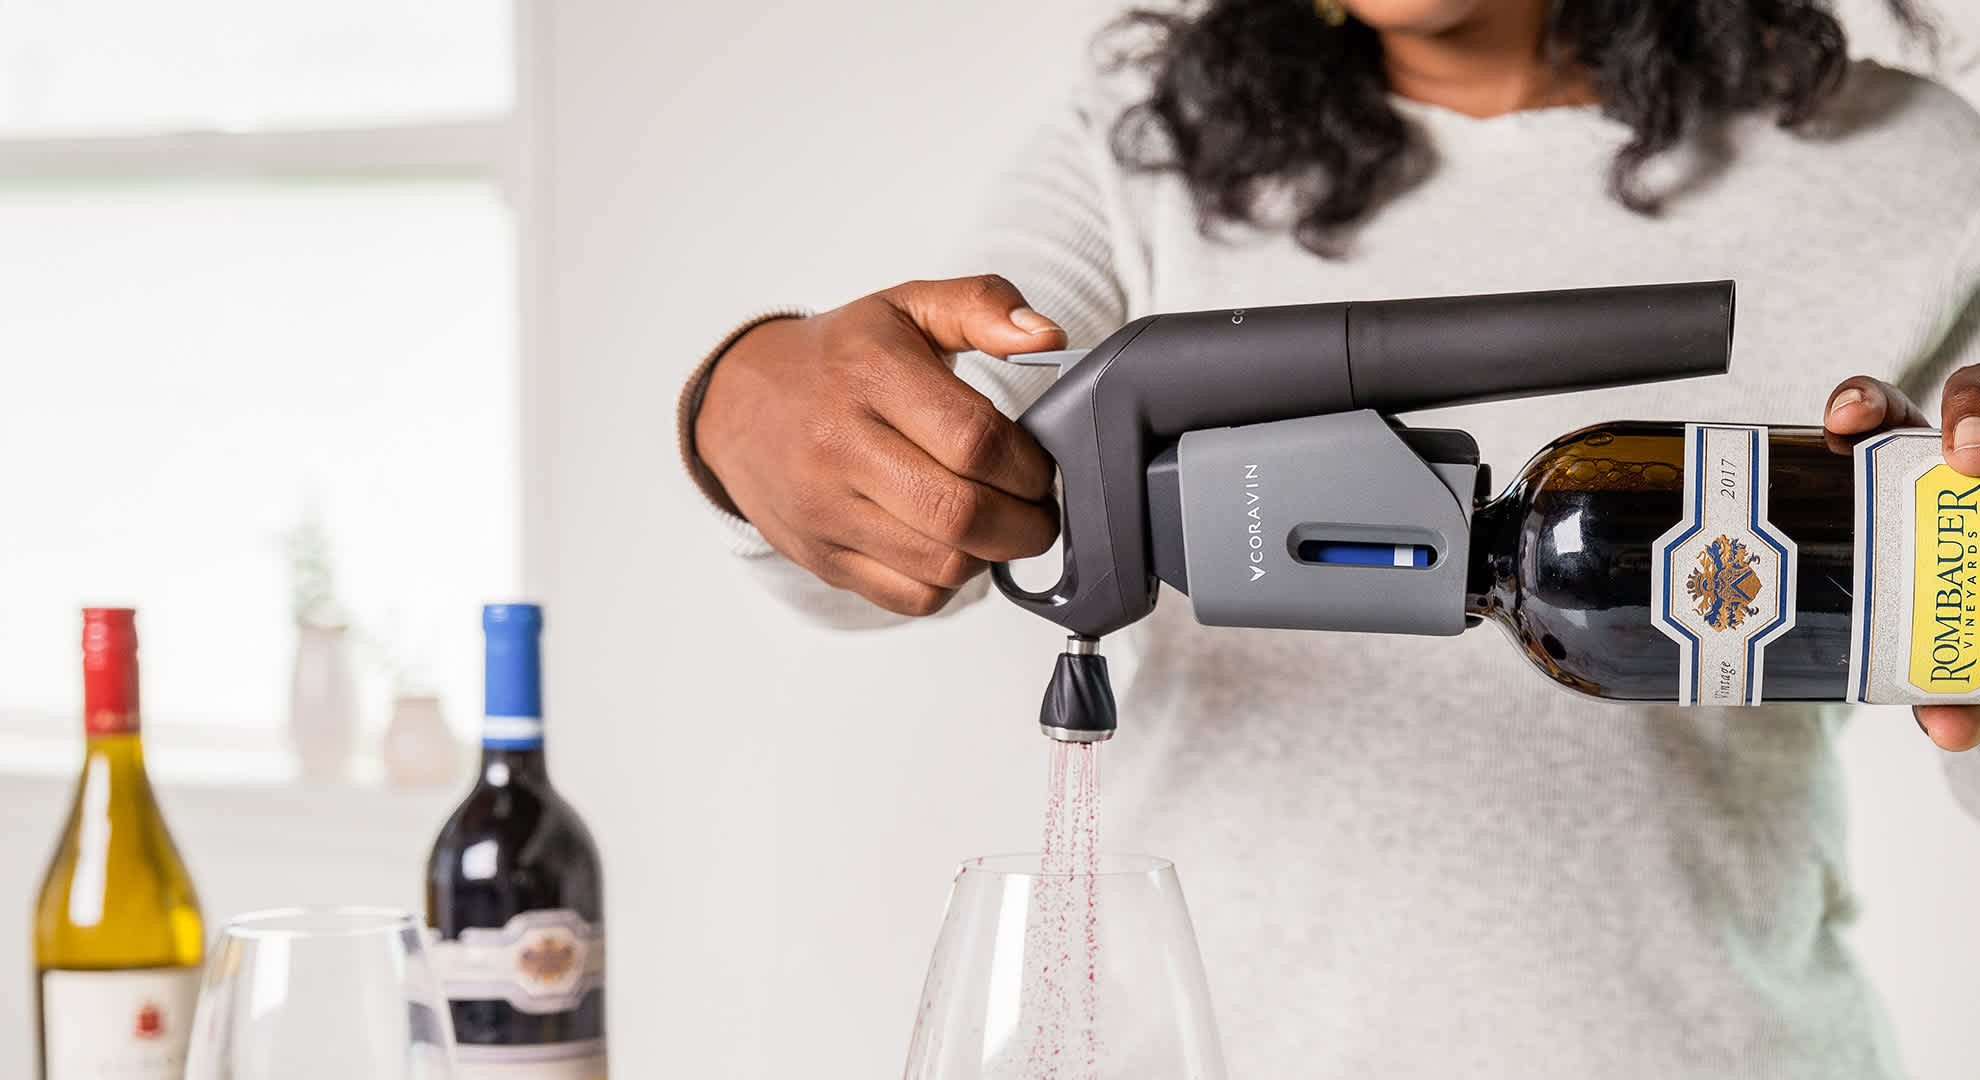 pouring red wine with the Coravin Aerator and Model Three Wine Preservation System